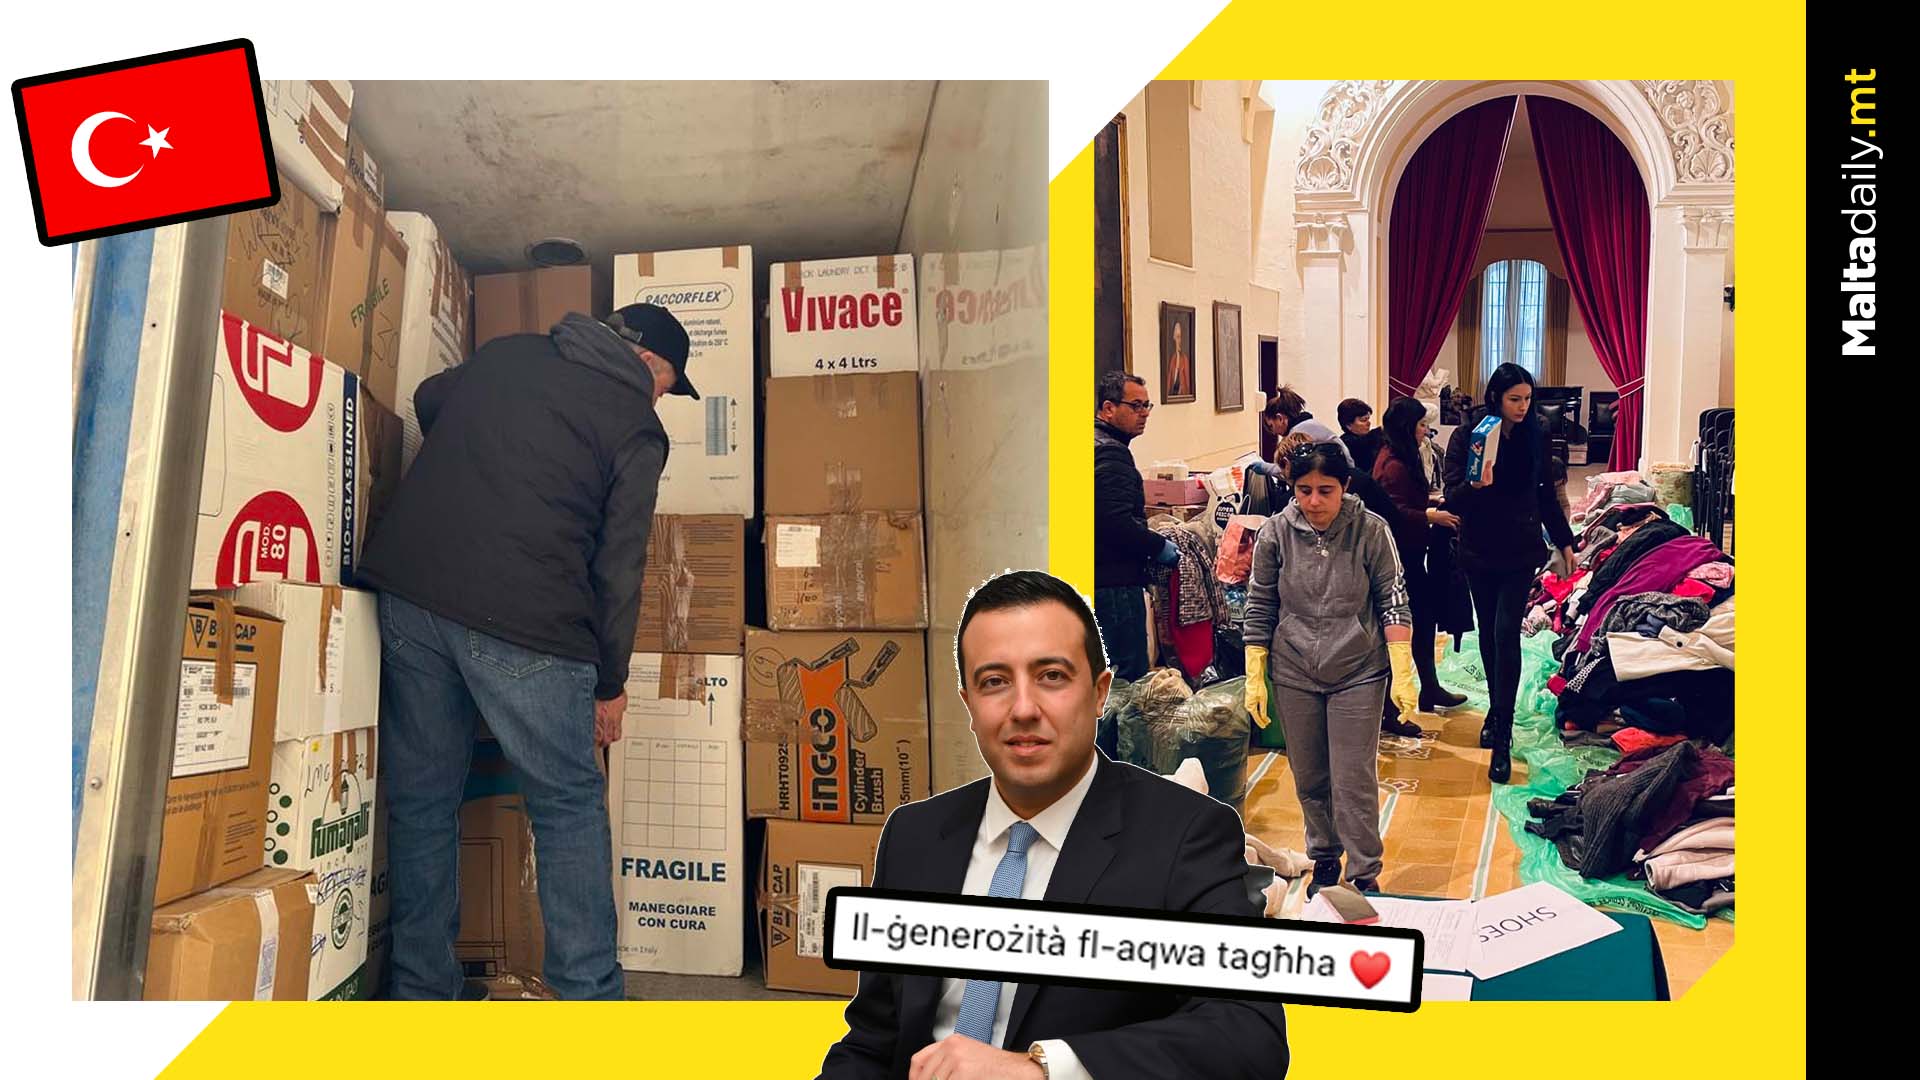 175 boxes filled at Gozo Ministry to donate to earthquake survivors